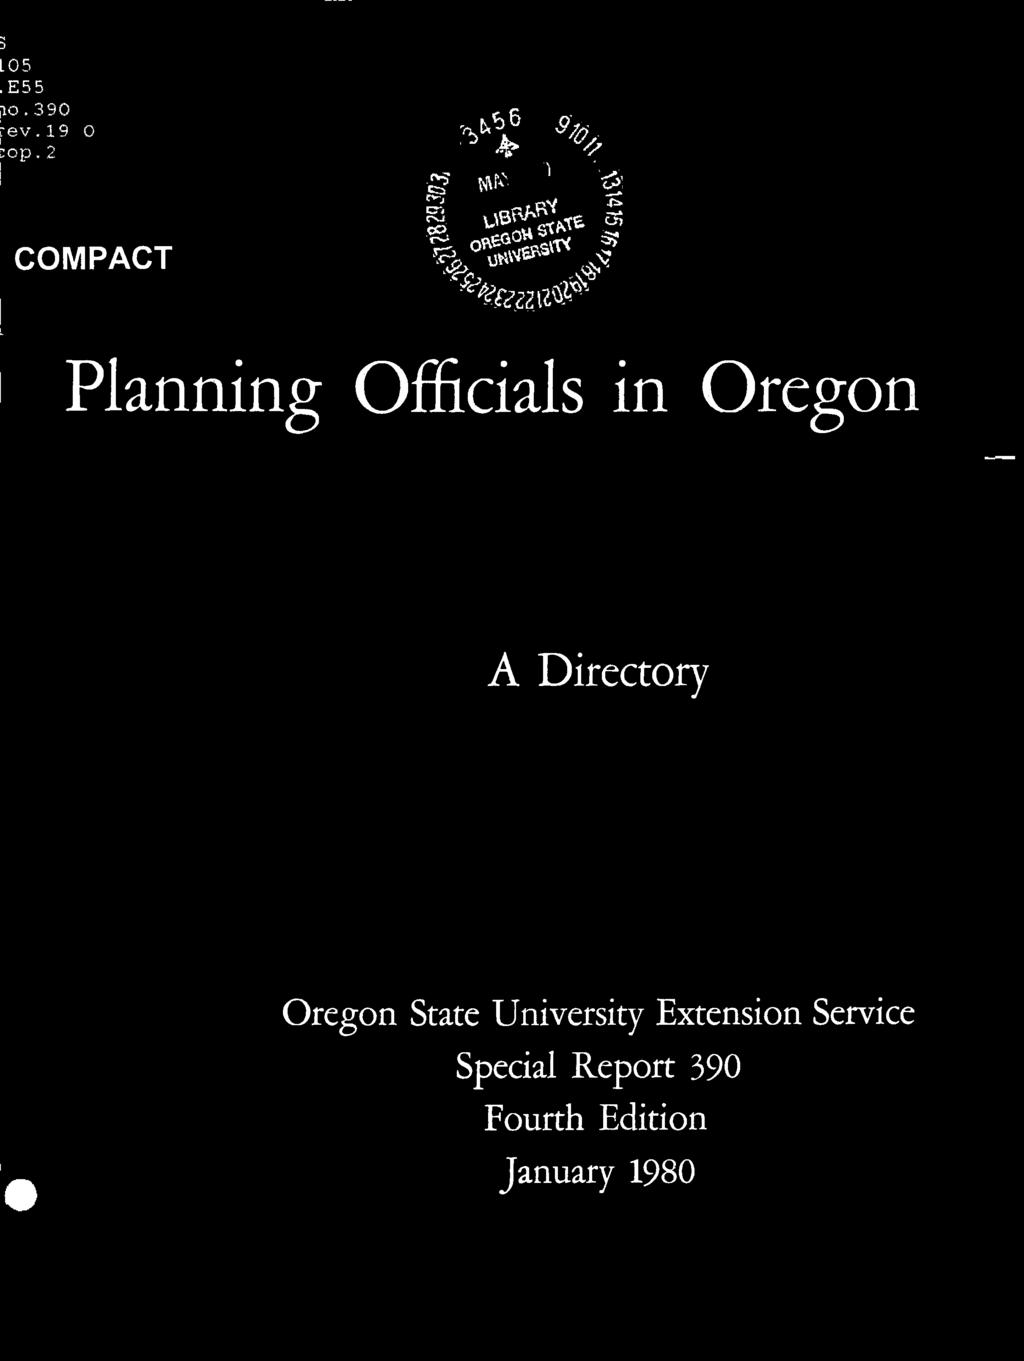 ISPet, -cfr ise 42E2 0' - Planning Officials in Oregon A